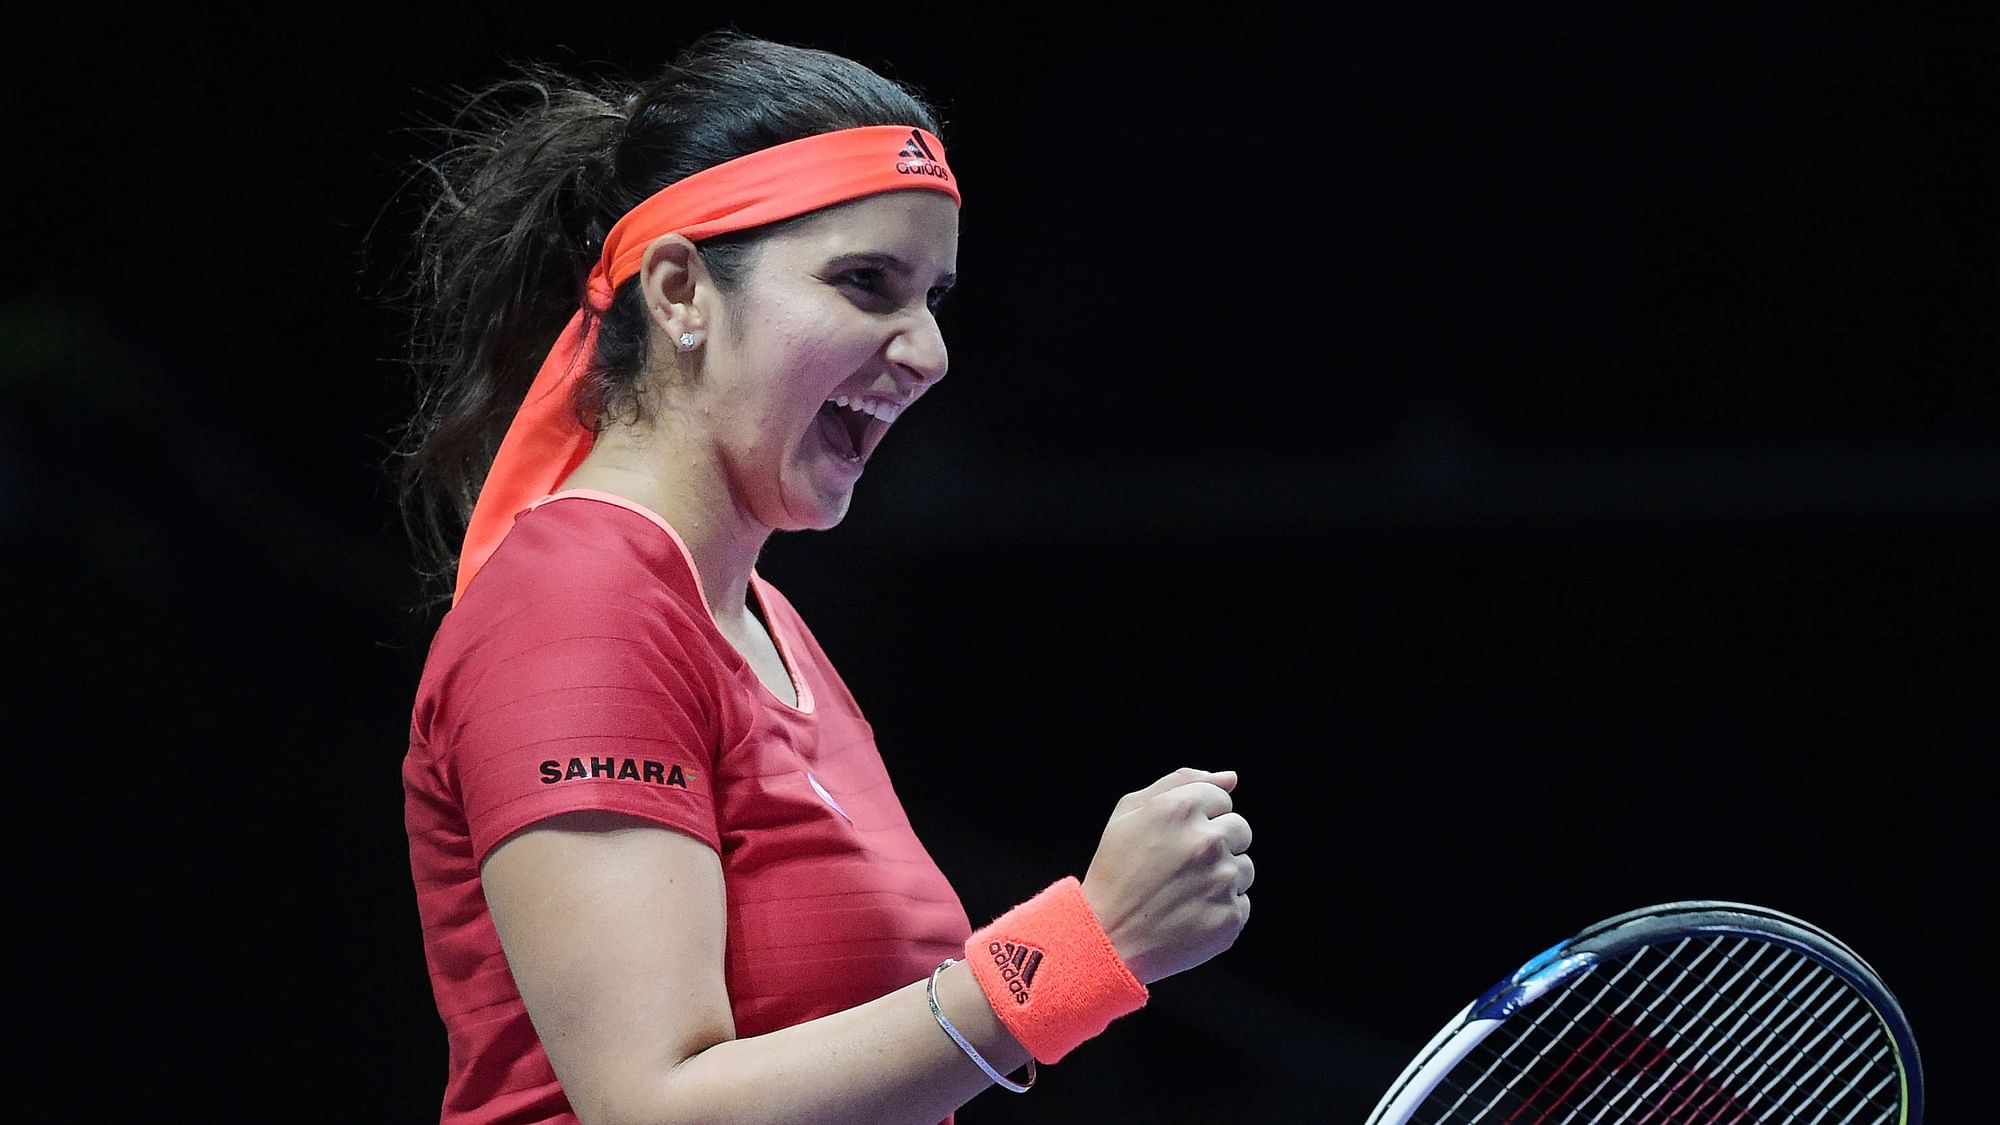 <div class="paragraphs"><p>Following Sania Mirza's retirement, here's a look at her career in pictures.</p></div>